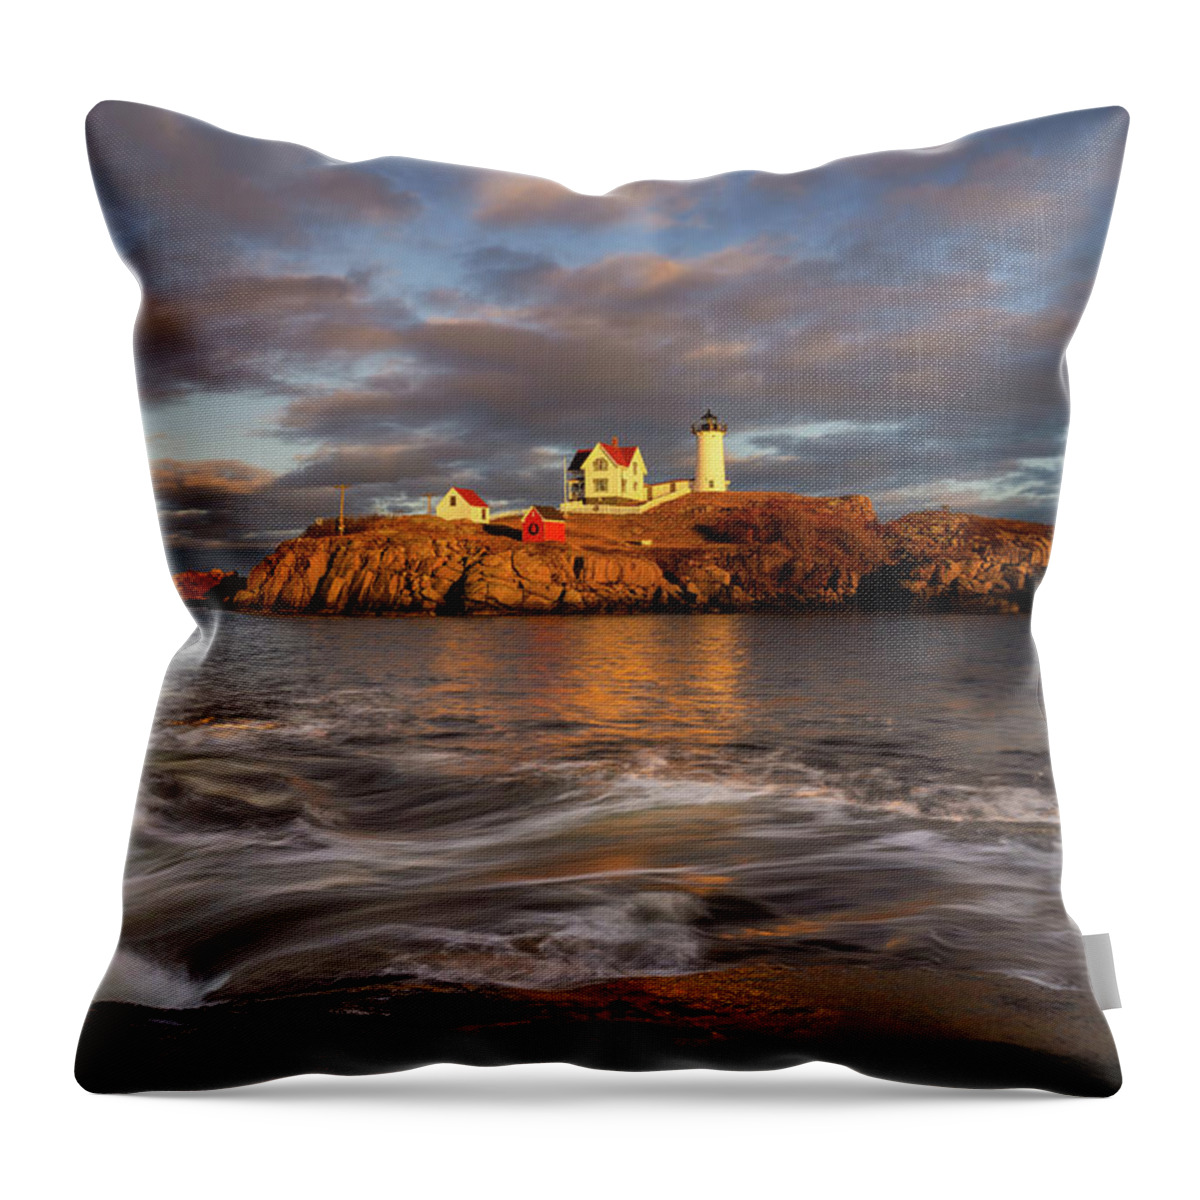 Nubble Lighthouse Throw Pillow featuring the photograph Nubble's Last Light - Nubble Lighthouse by Darren White